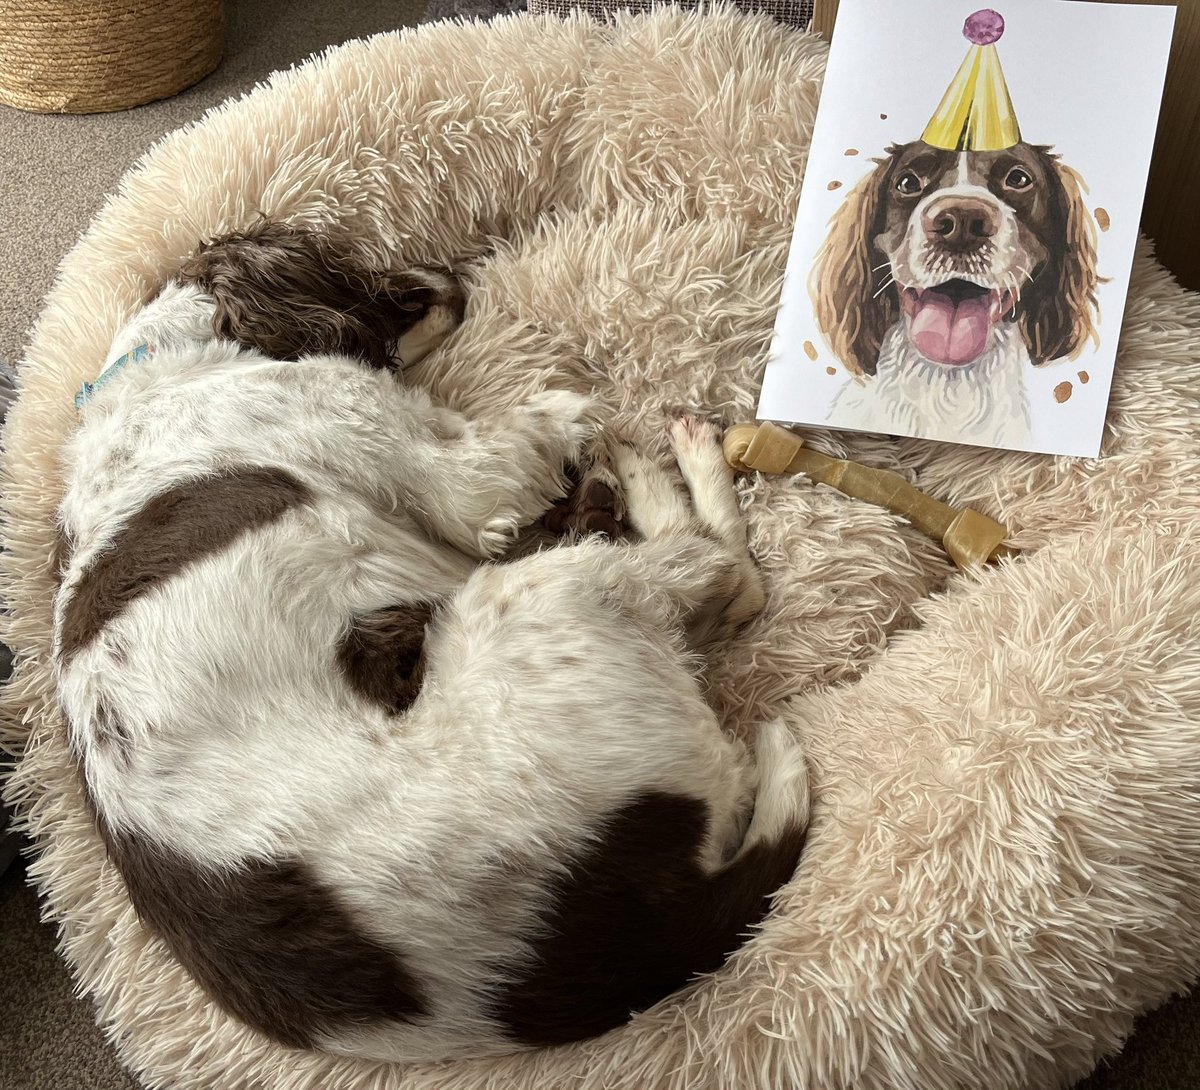 We did tire her out in the end. And thanks for the card @thortful